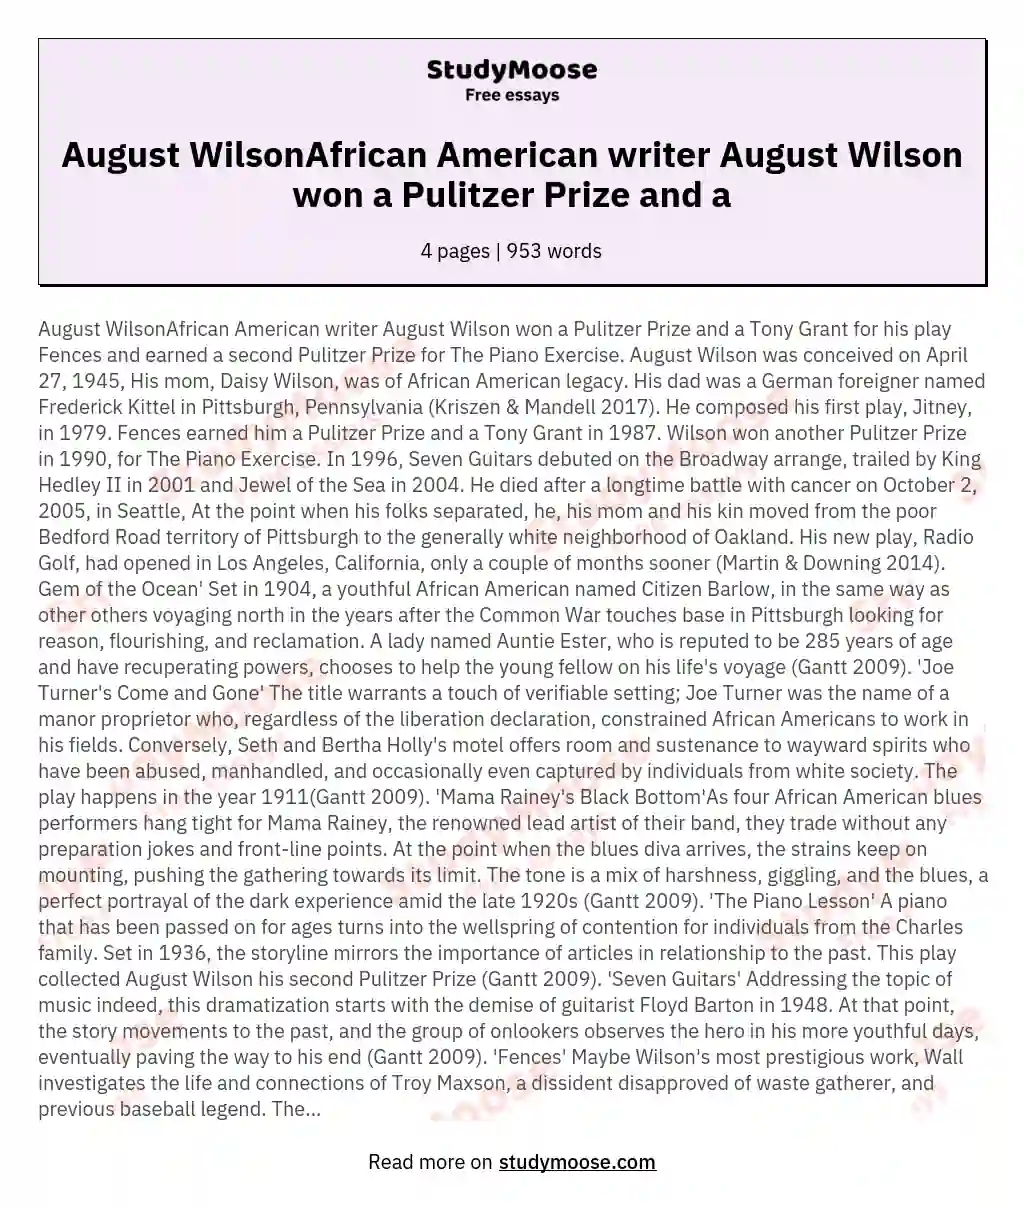 August WilsonAfrican American writer August Wilson won a Pulitzer Prize and a